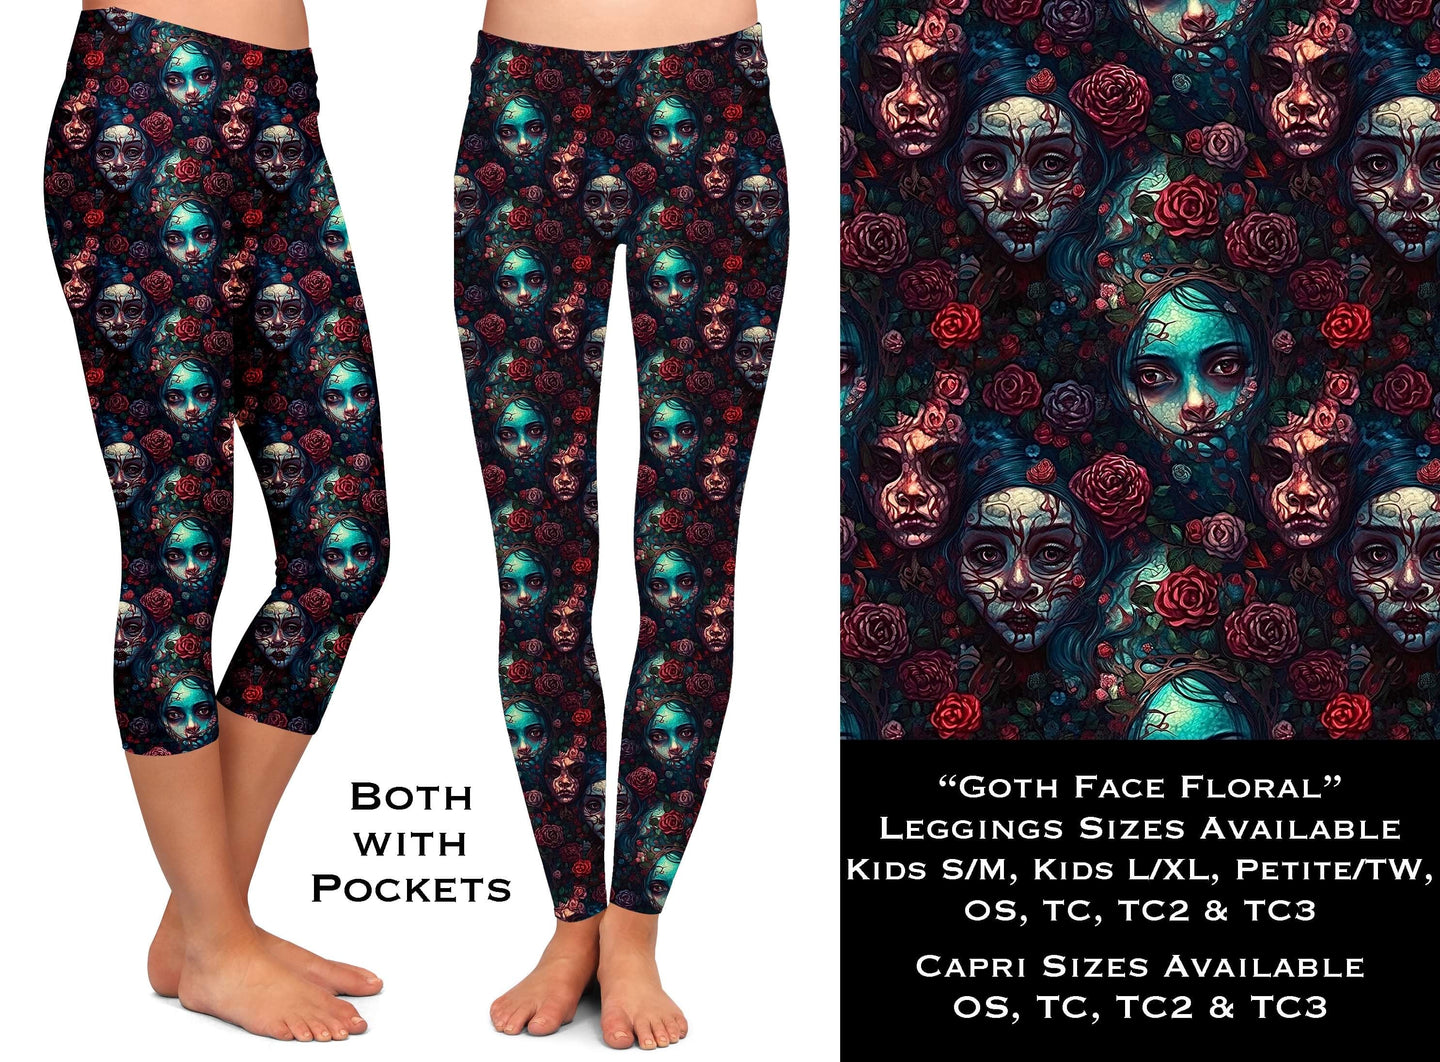 Goth Face Floral Leggings & Capris with Pockets